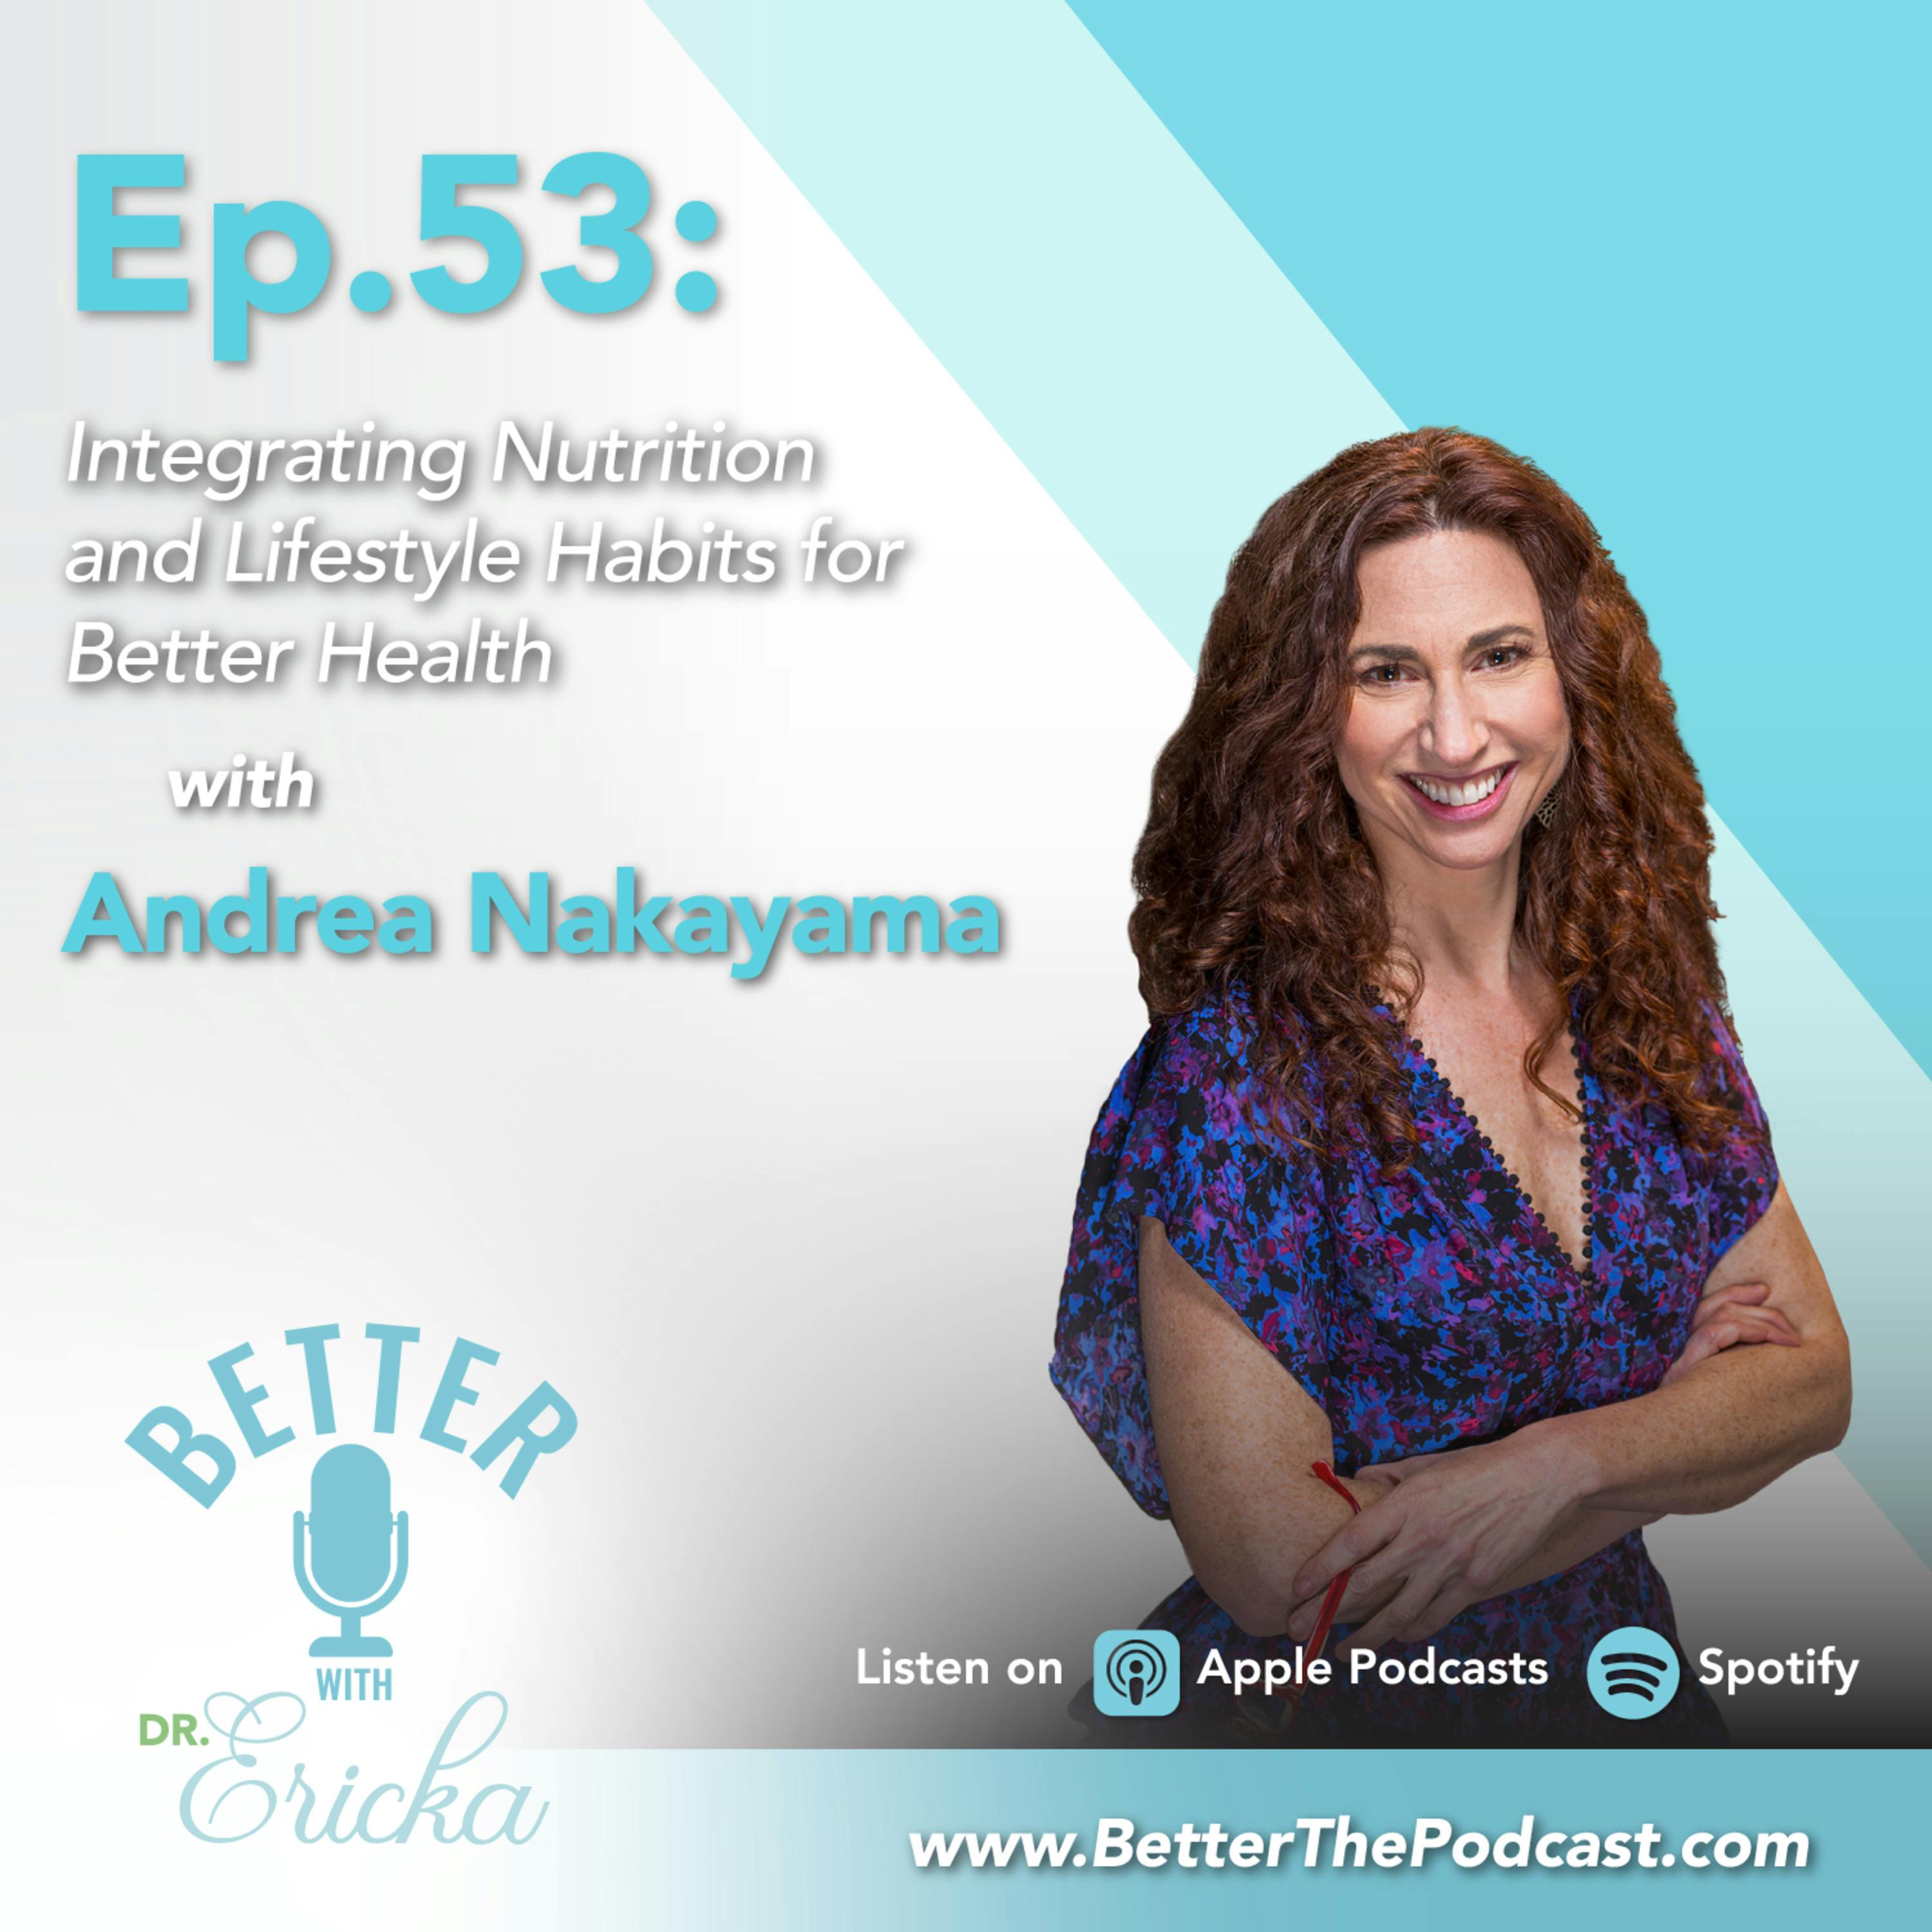 Integrating Nutrition and Lifestyle Habits for Better Health with Andrea Nakayama